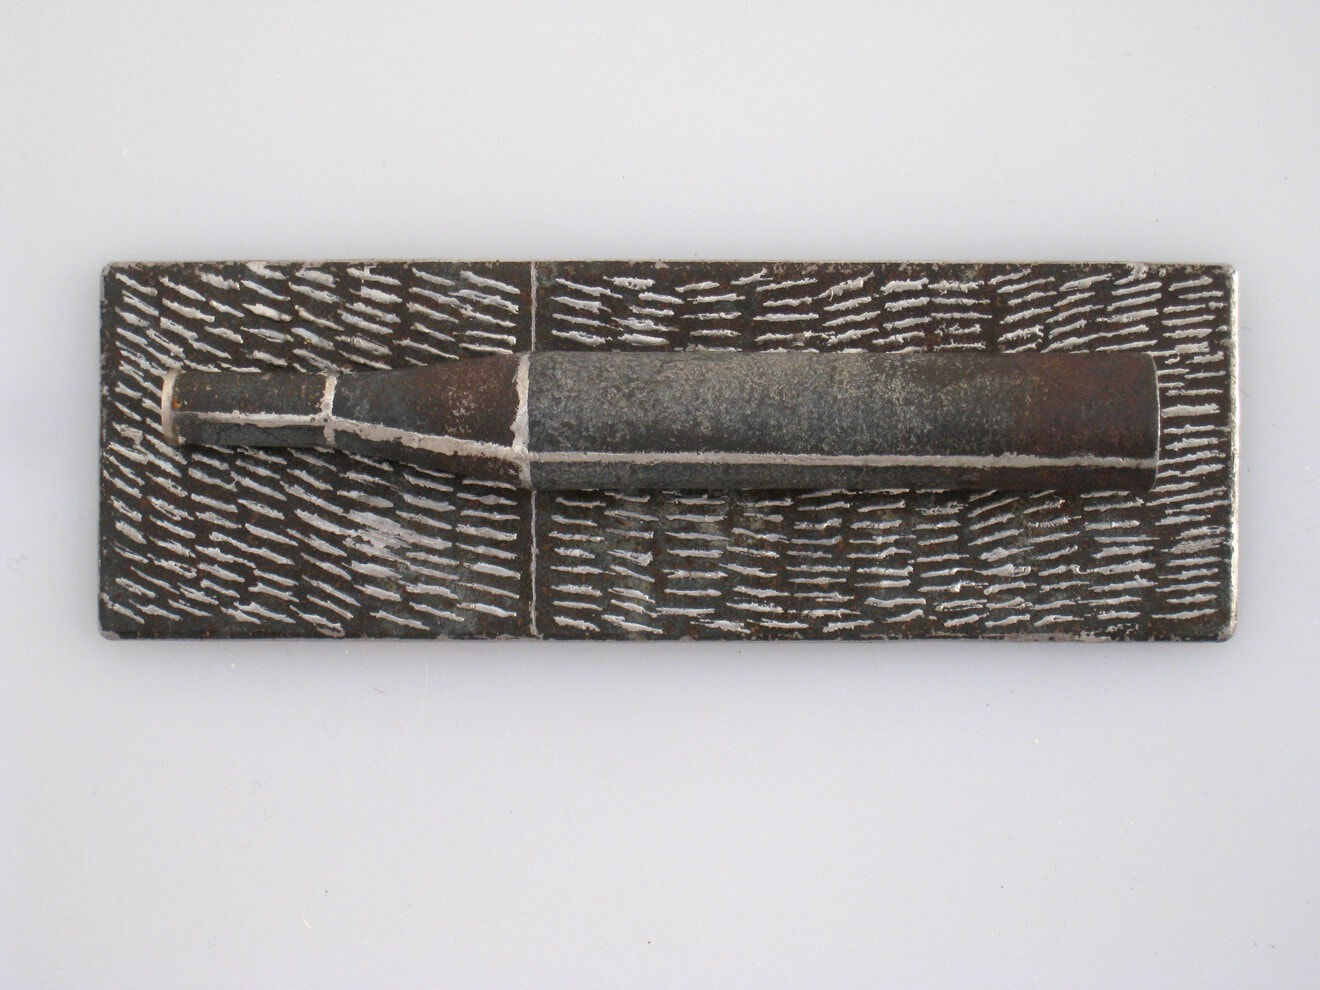 1991-Brooch-Galvanised-iron-stainless-steel-Muhling-collection-1-1-1320x990